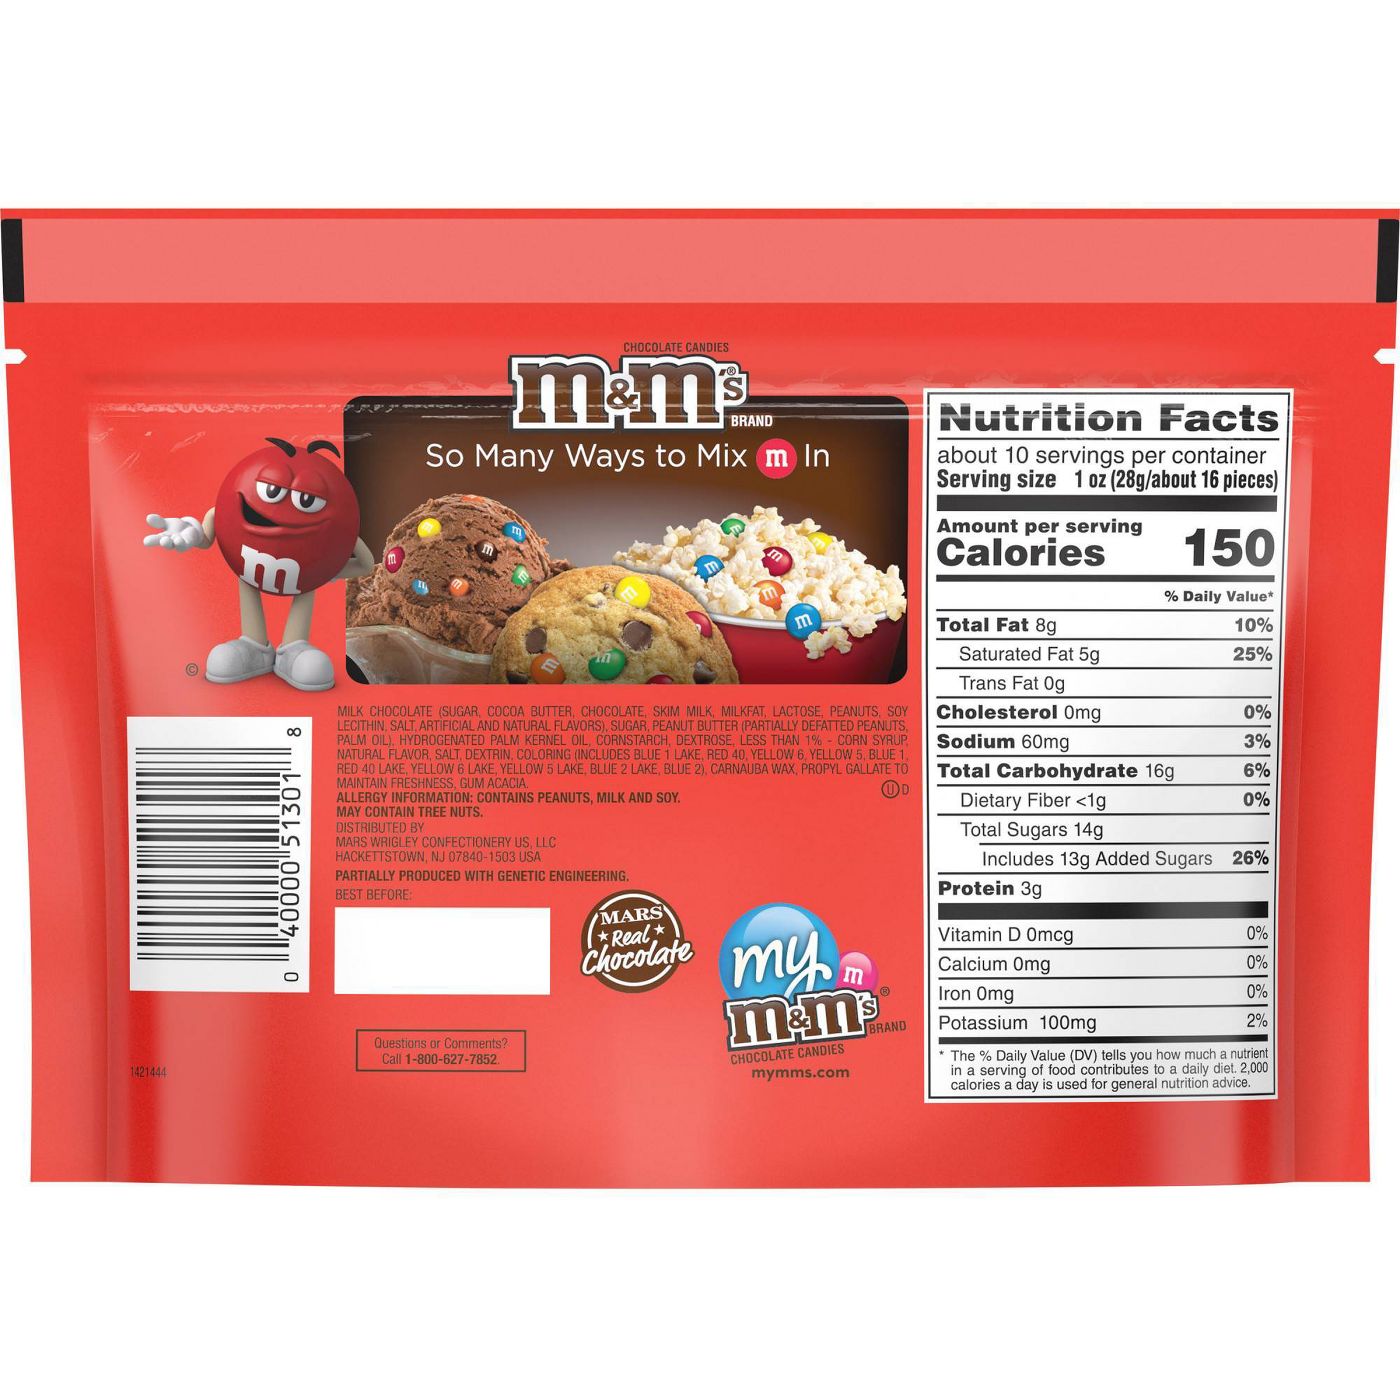 M&M S Peanut Butter Chocolate Candy Sharing Size - 9 Oz Bag (Pack